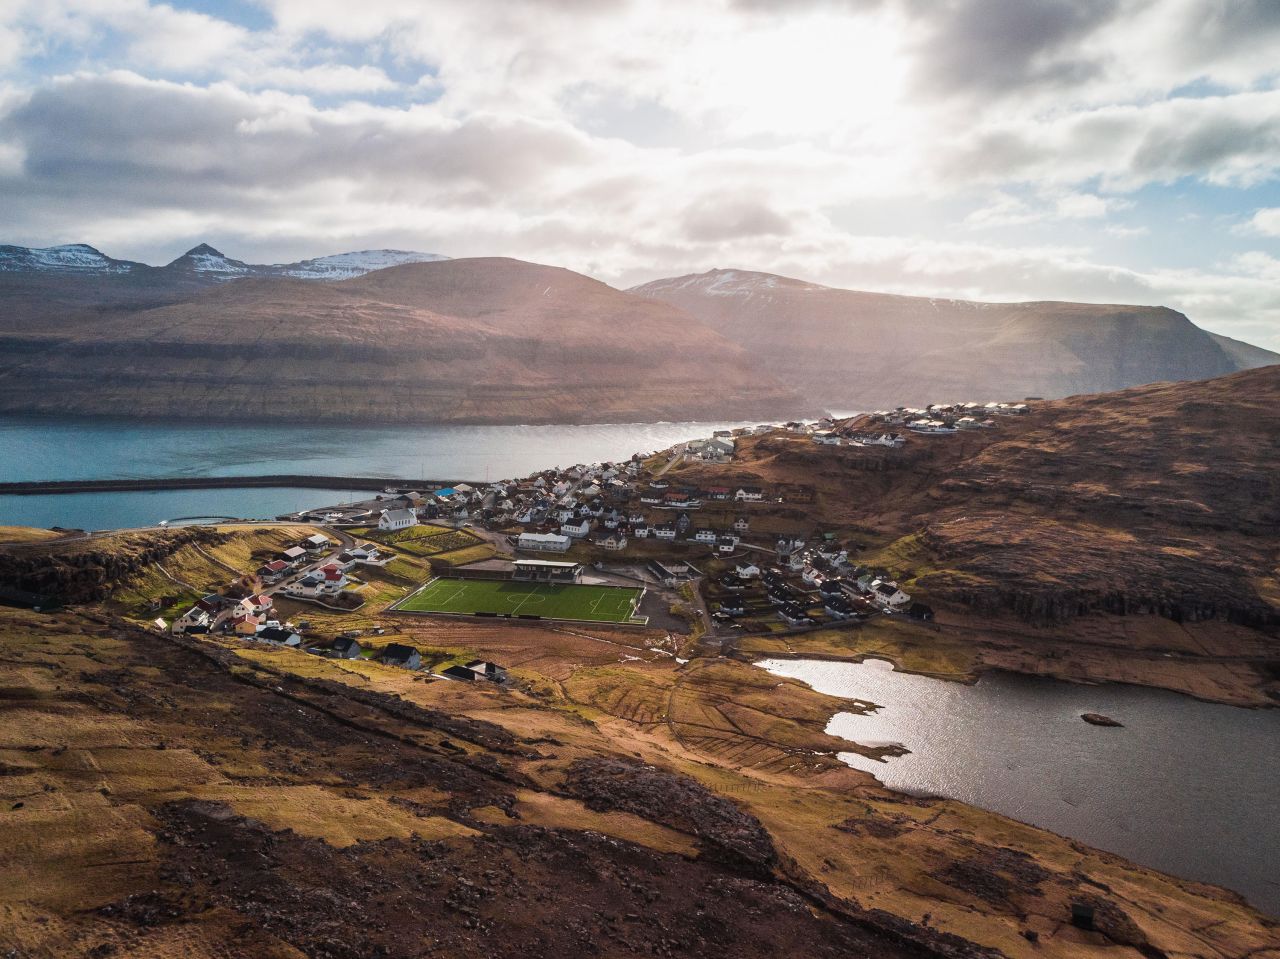 Aerial view of the village Eioi with snow-covered mountain range, football field and dramatic sky during sunset (Faroe Islands, Denmark, Europe)